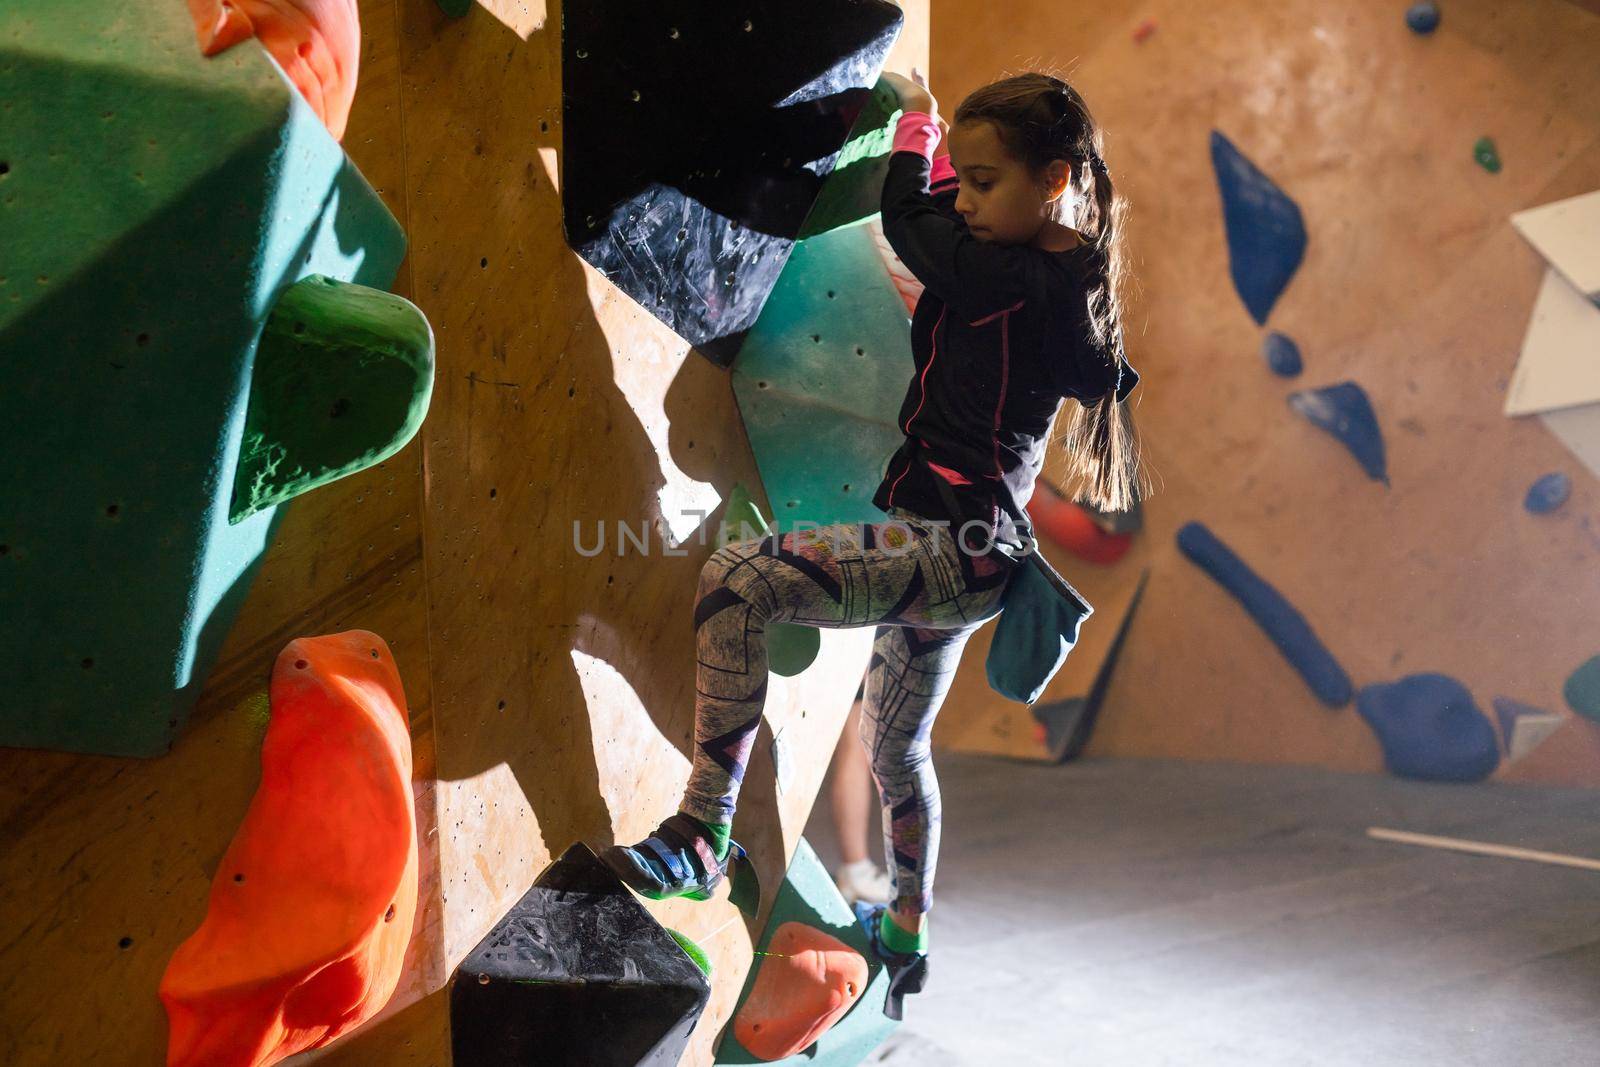 Junior Climber Girl shirt hanging on holds on climbing wall of indoor gym.